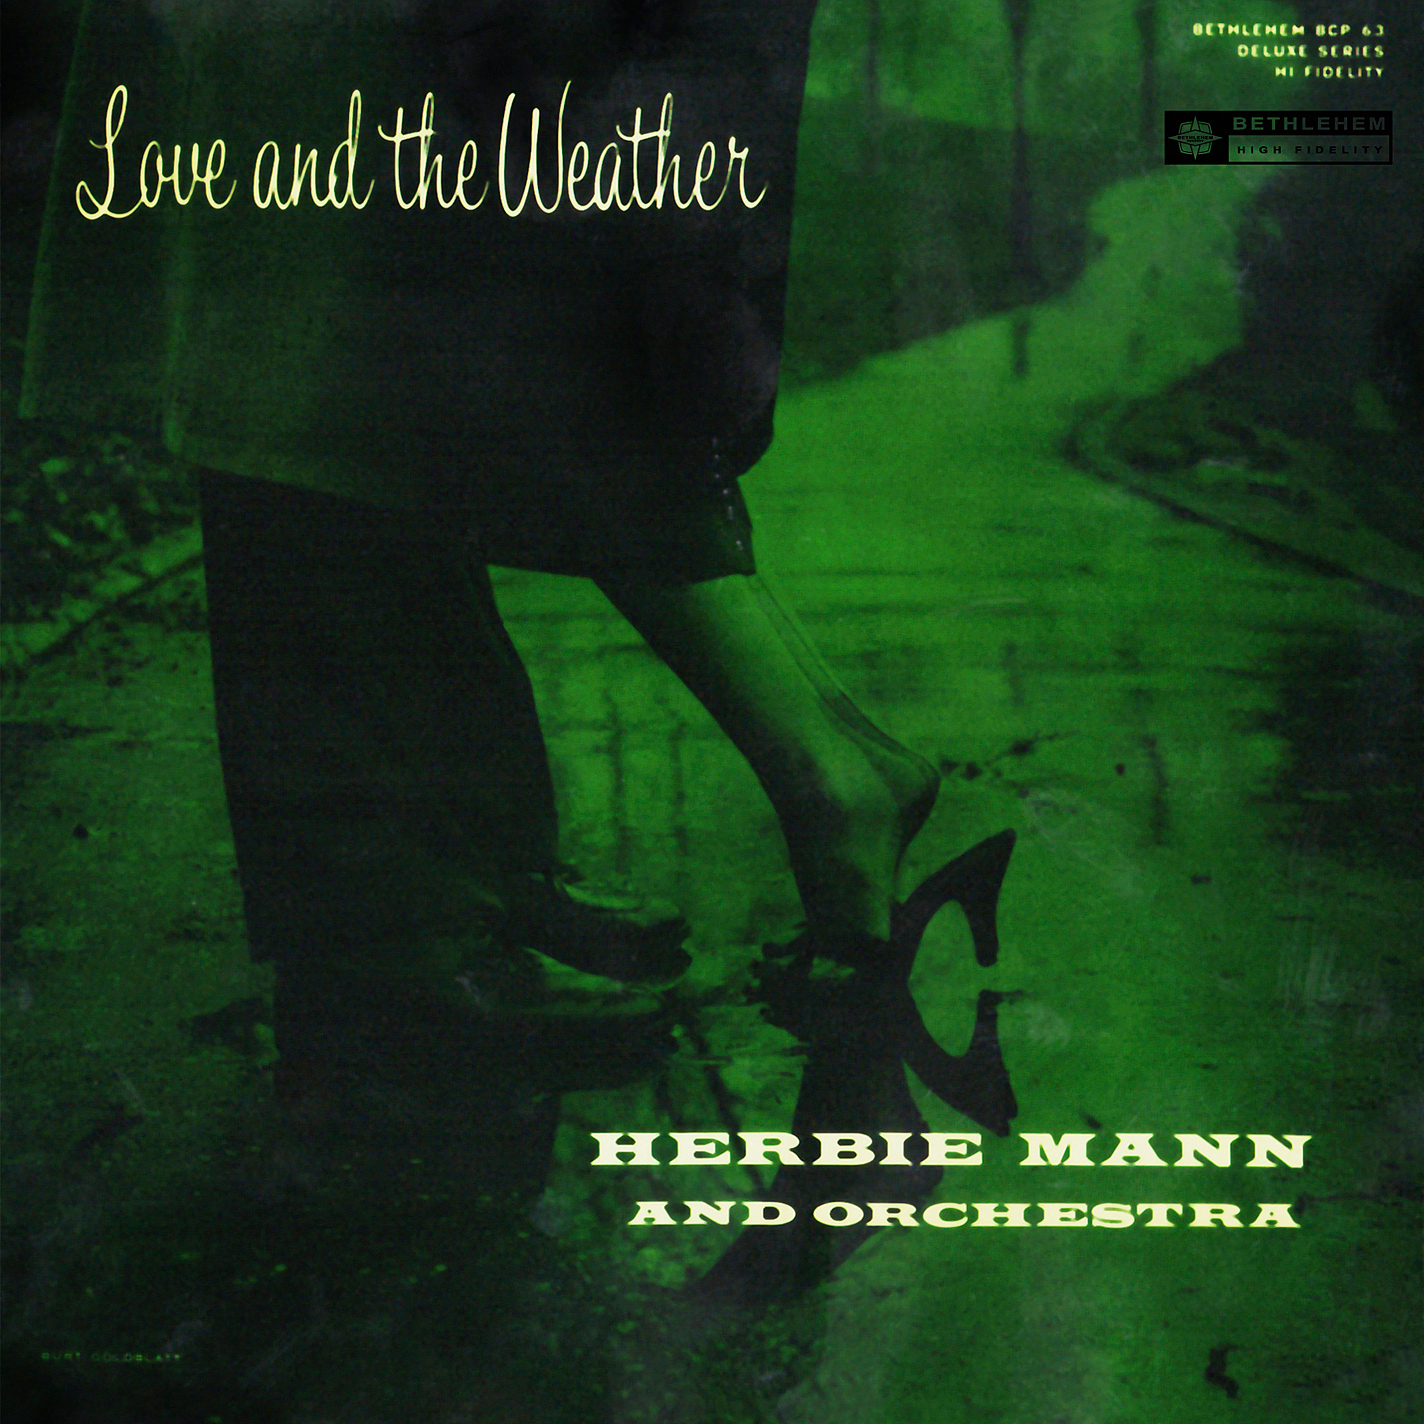 Herbie Mann And Orchestra - Love And The Weather (1956/2014) [PrestoClassical FLAC 24bit/96kHz]